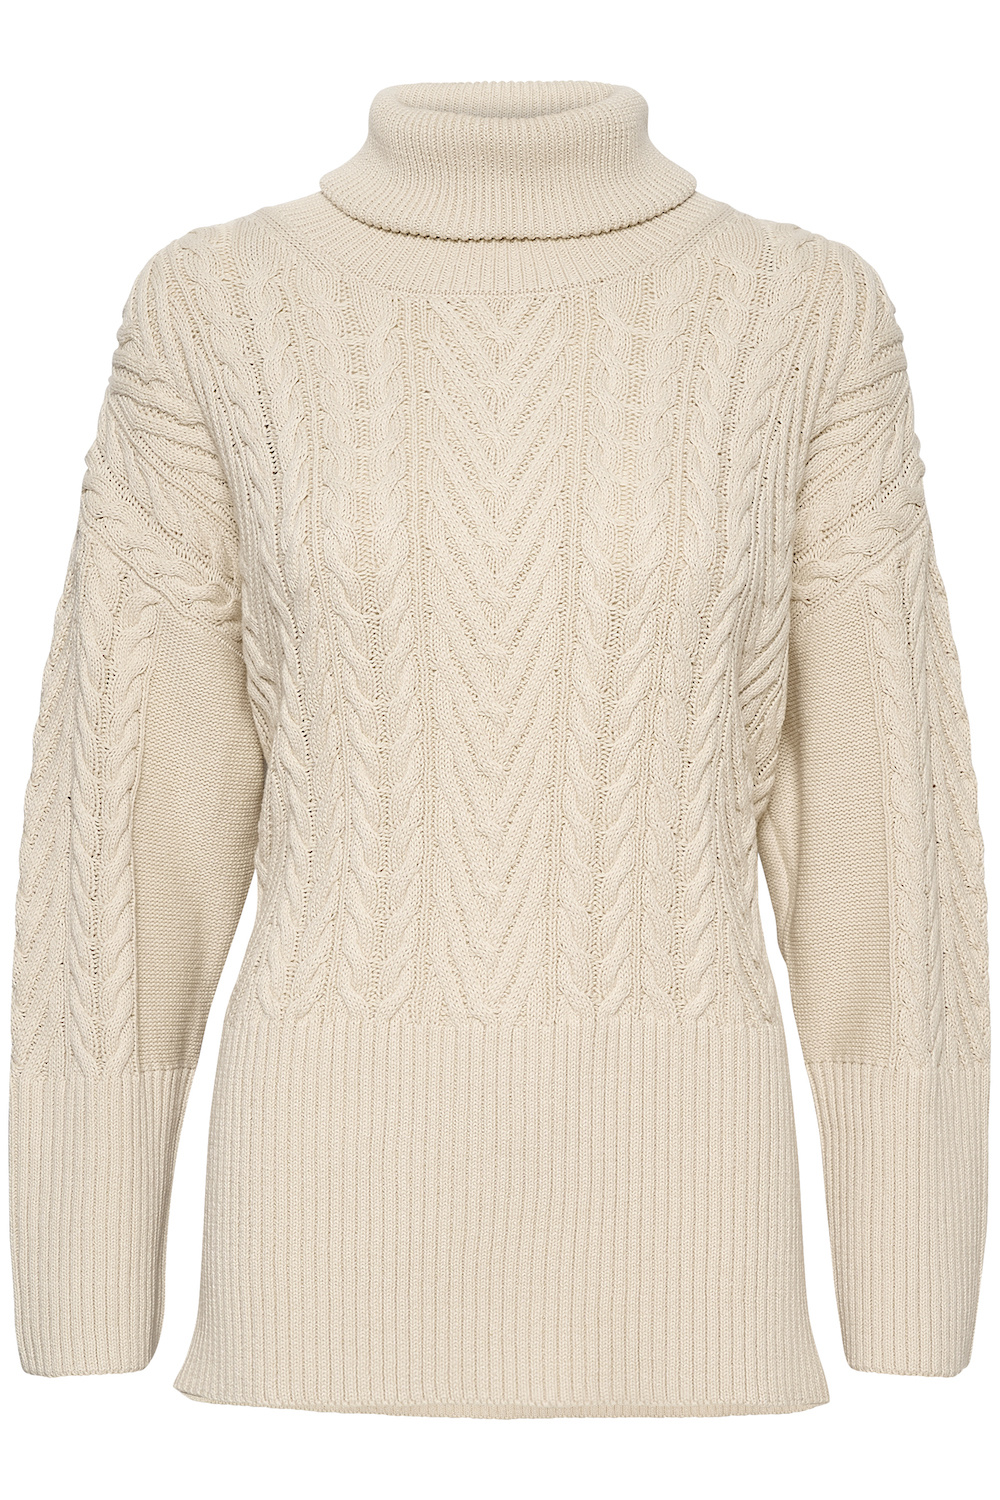 Soft Knit Rollneck Longline Jumper With Side Splits In Cream | One Nation  Clothing | SilkFred US